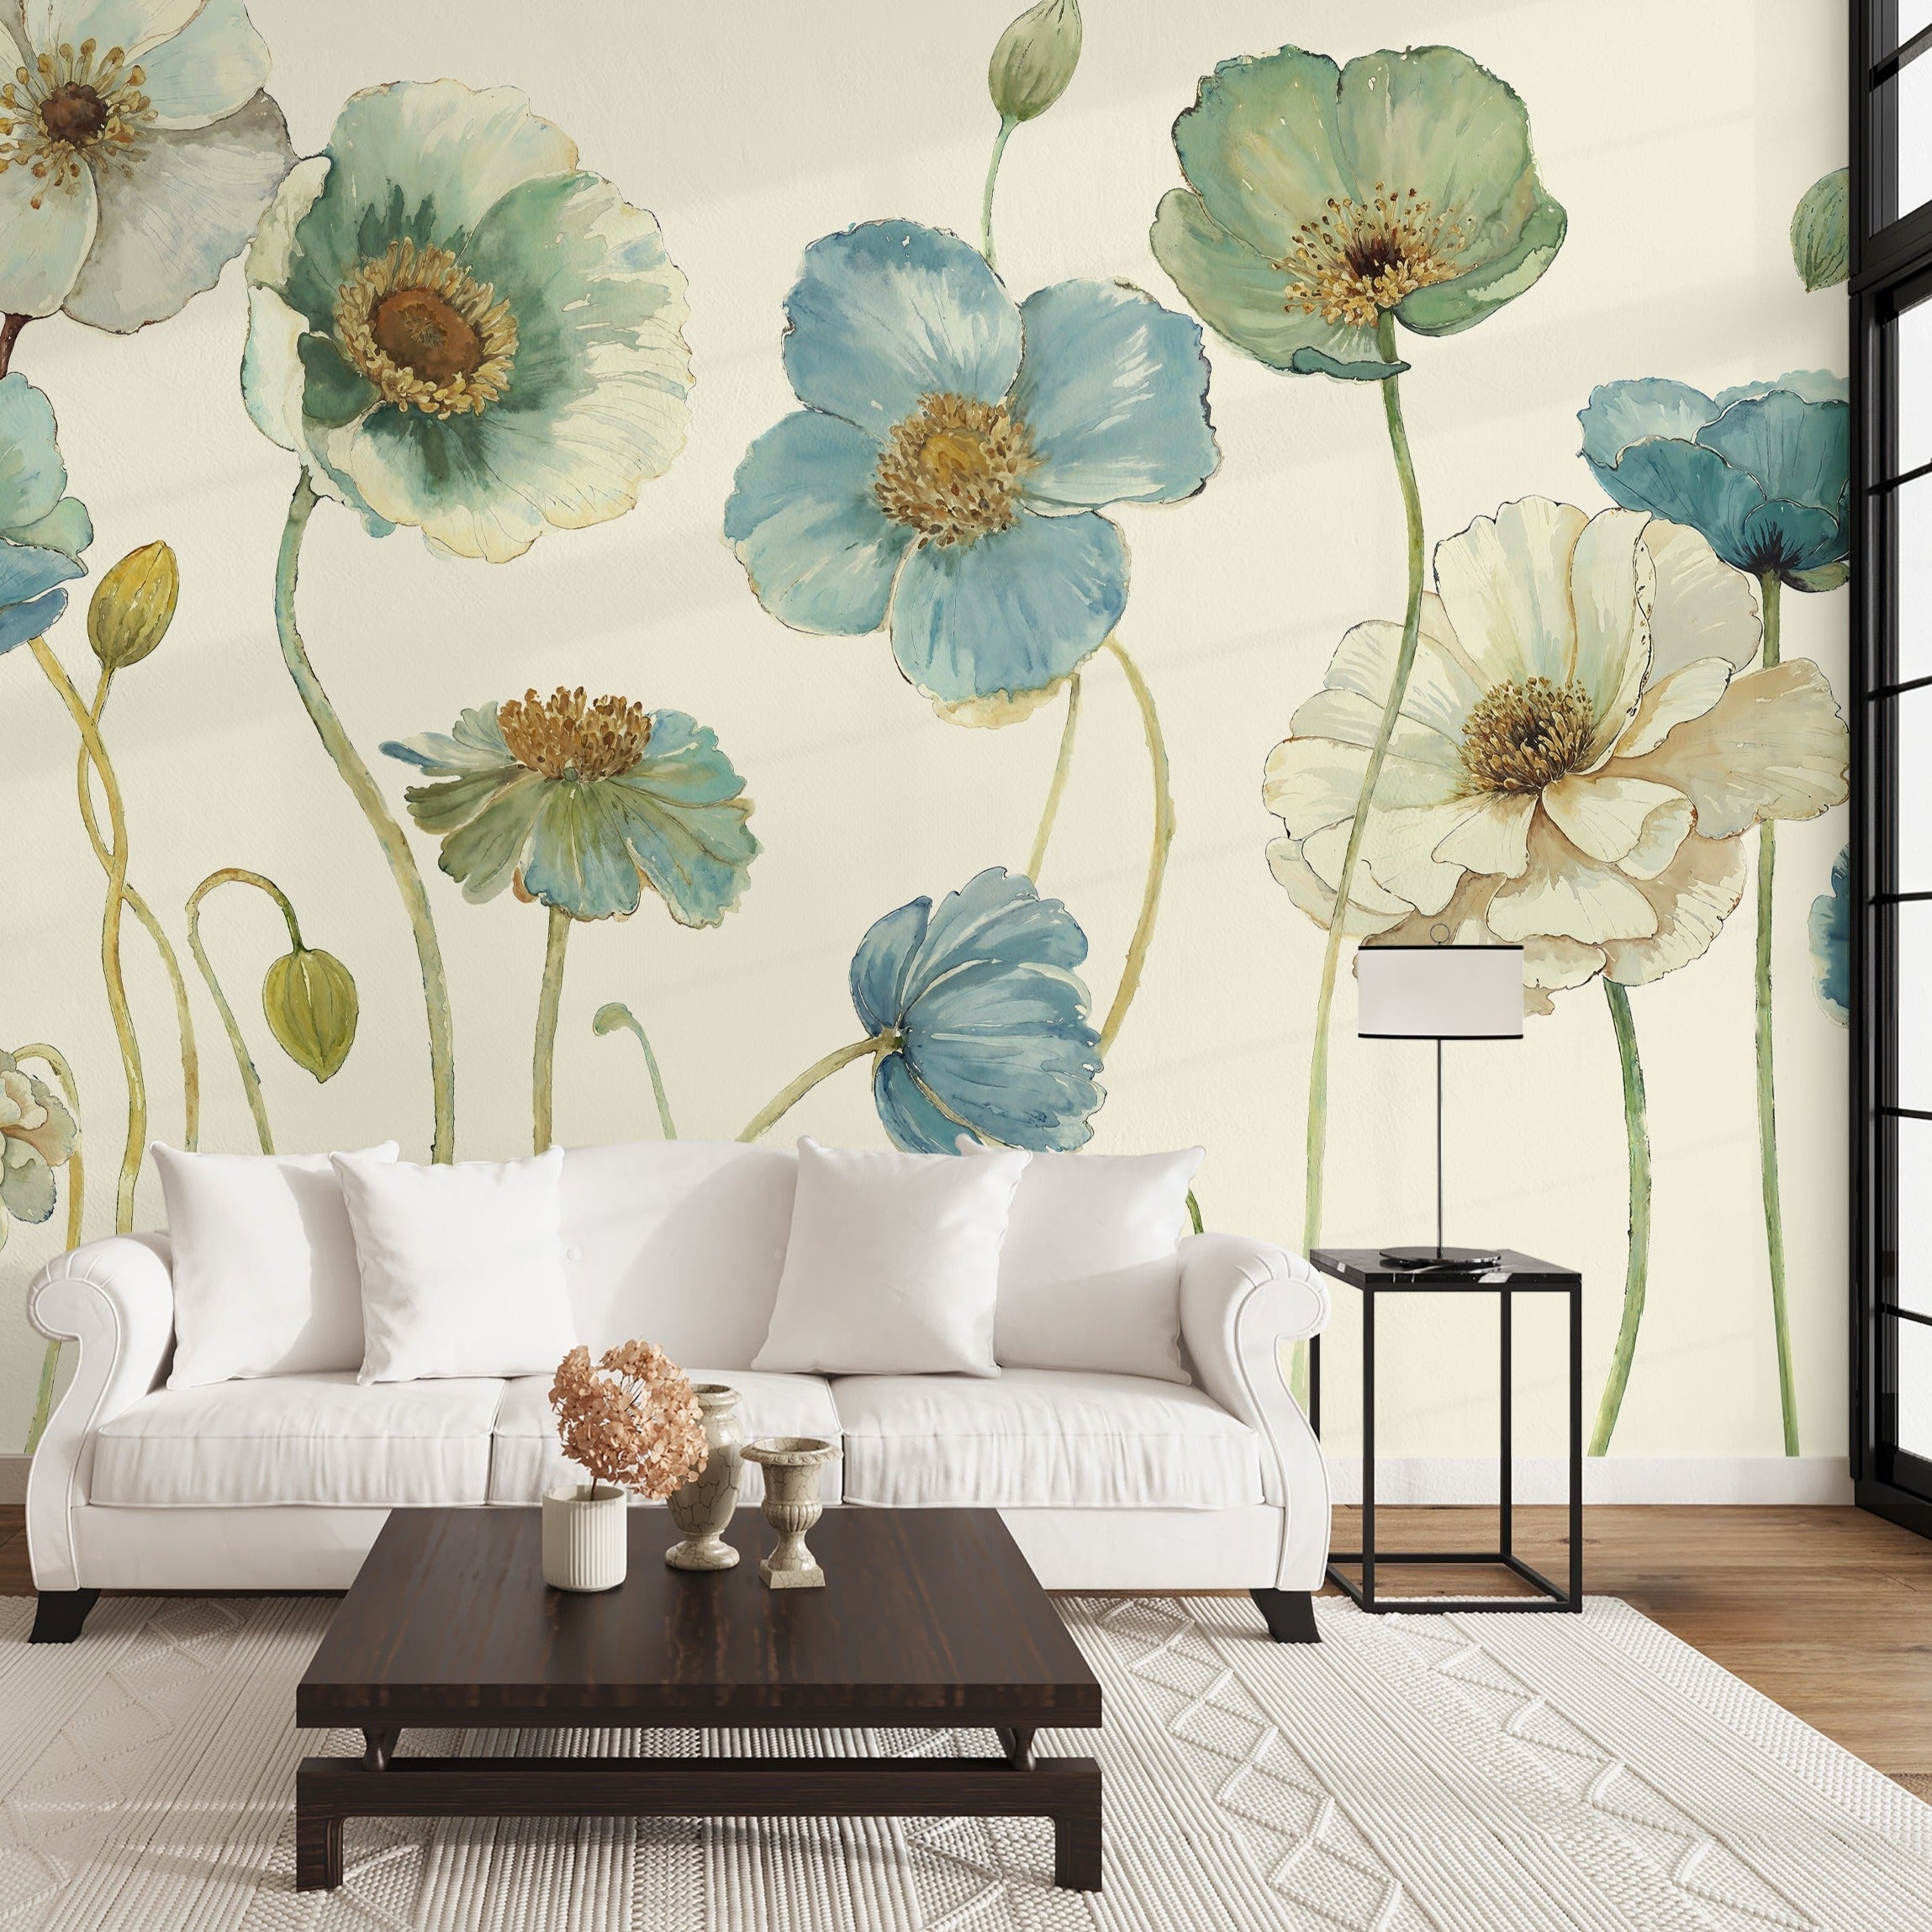 "Meadow Whispers (Cream) Wallpaper by Wall Blush accentuates living room walls with floral elegance."